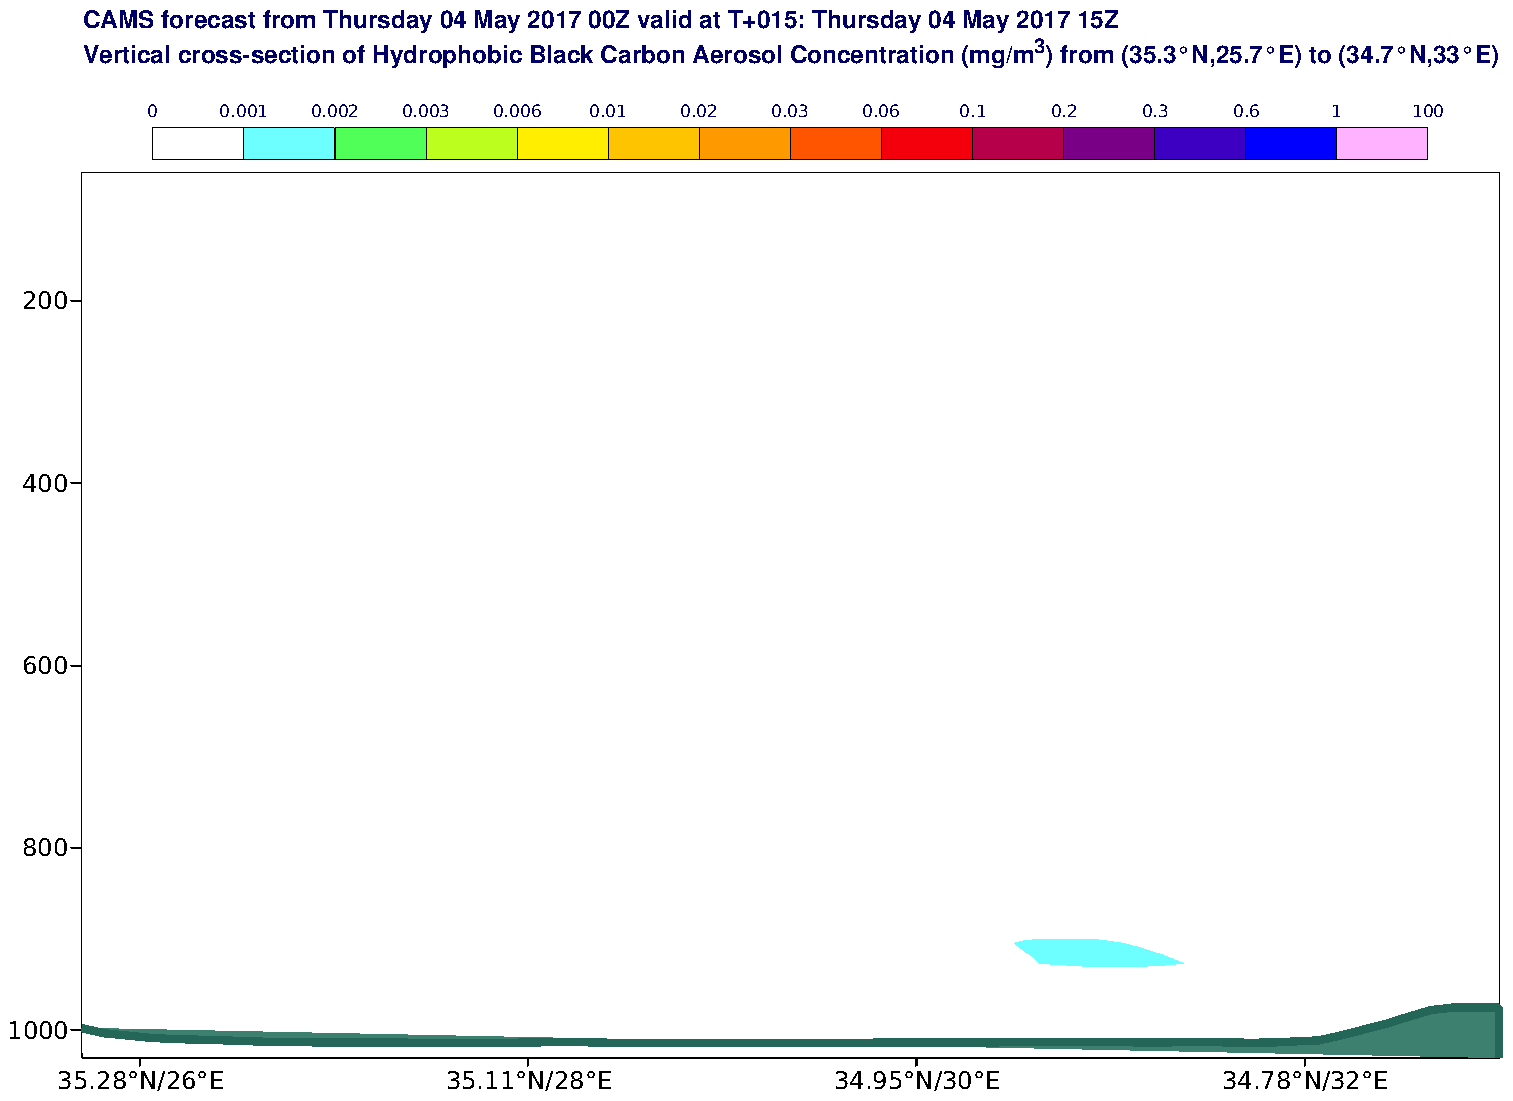 Vertical cross-section of Hydrophobic Black Carbon Aerosol Concentration (mg/m3) valid at T15 - 2017-05-04 15:00